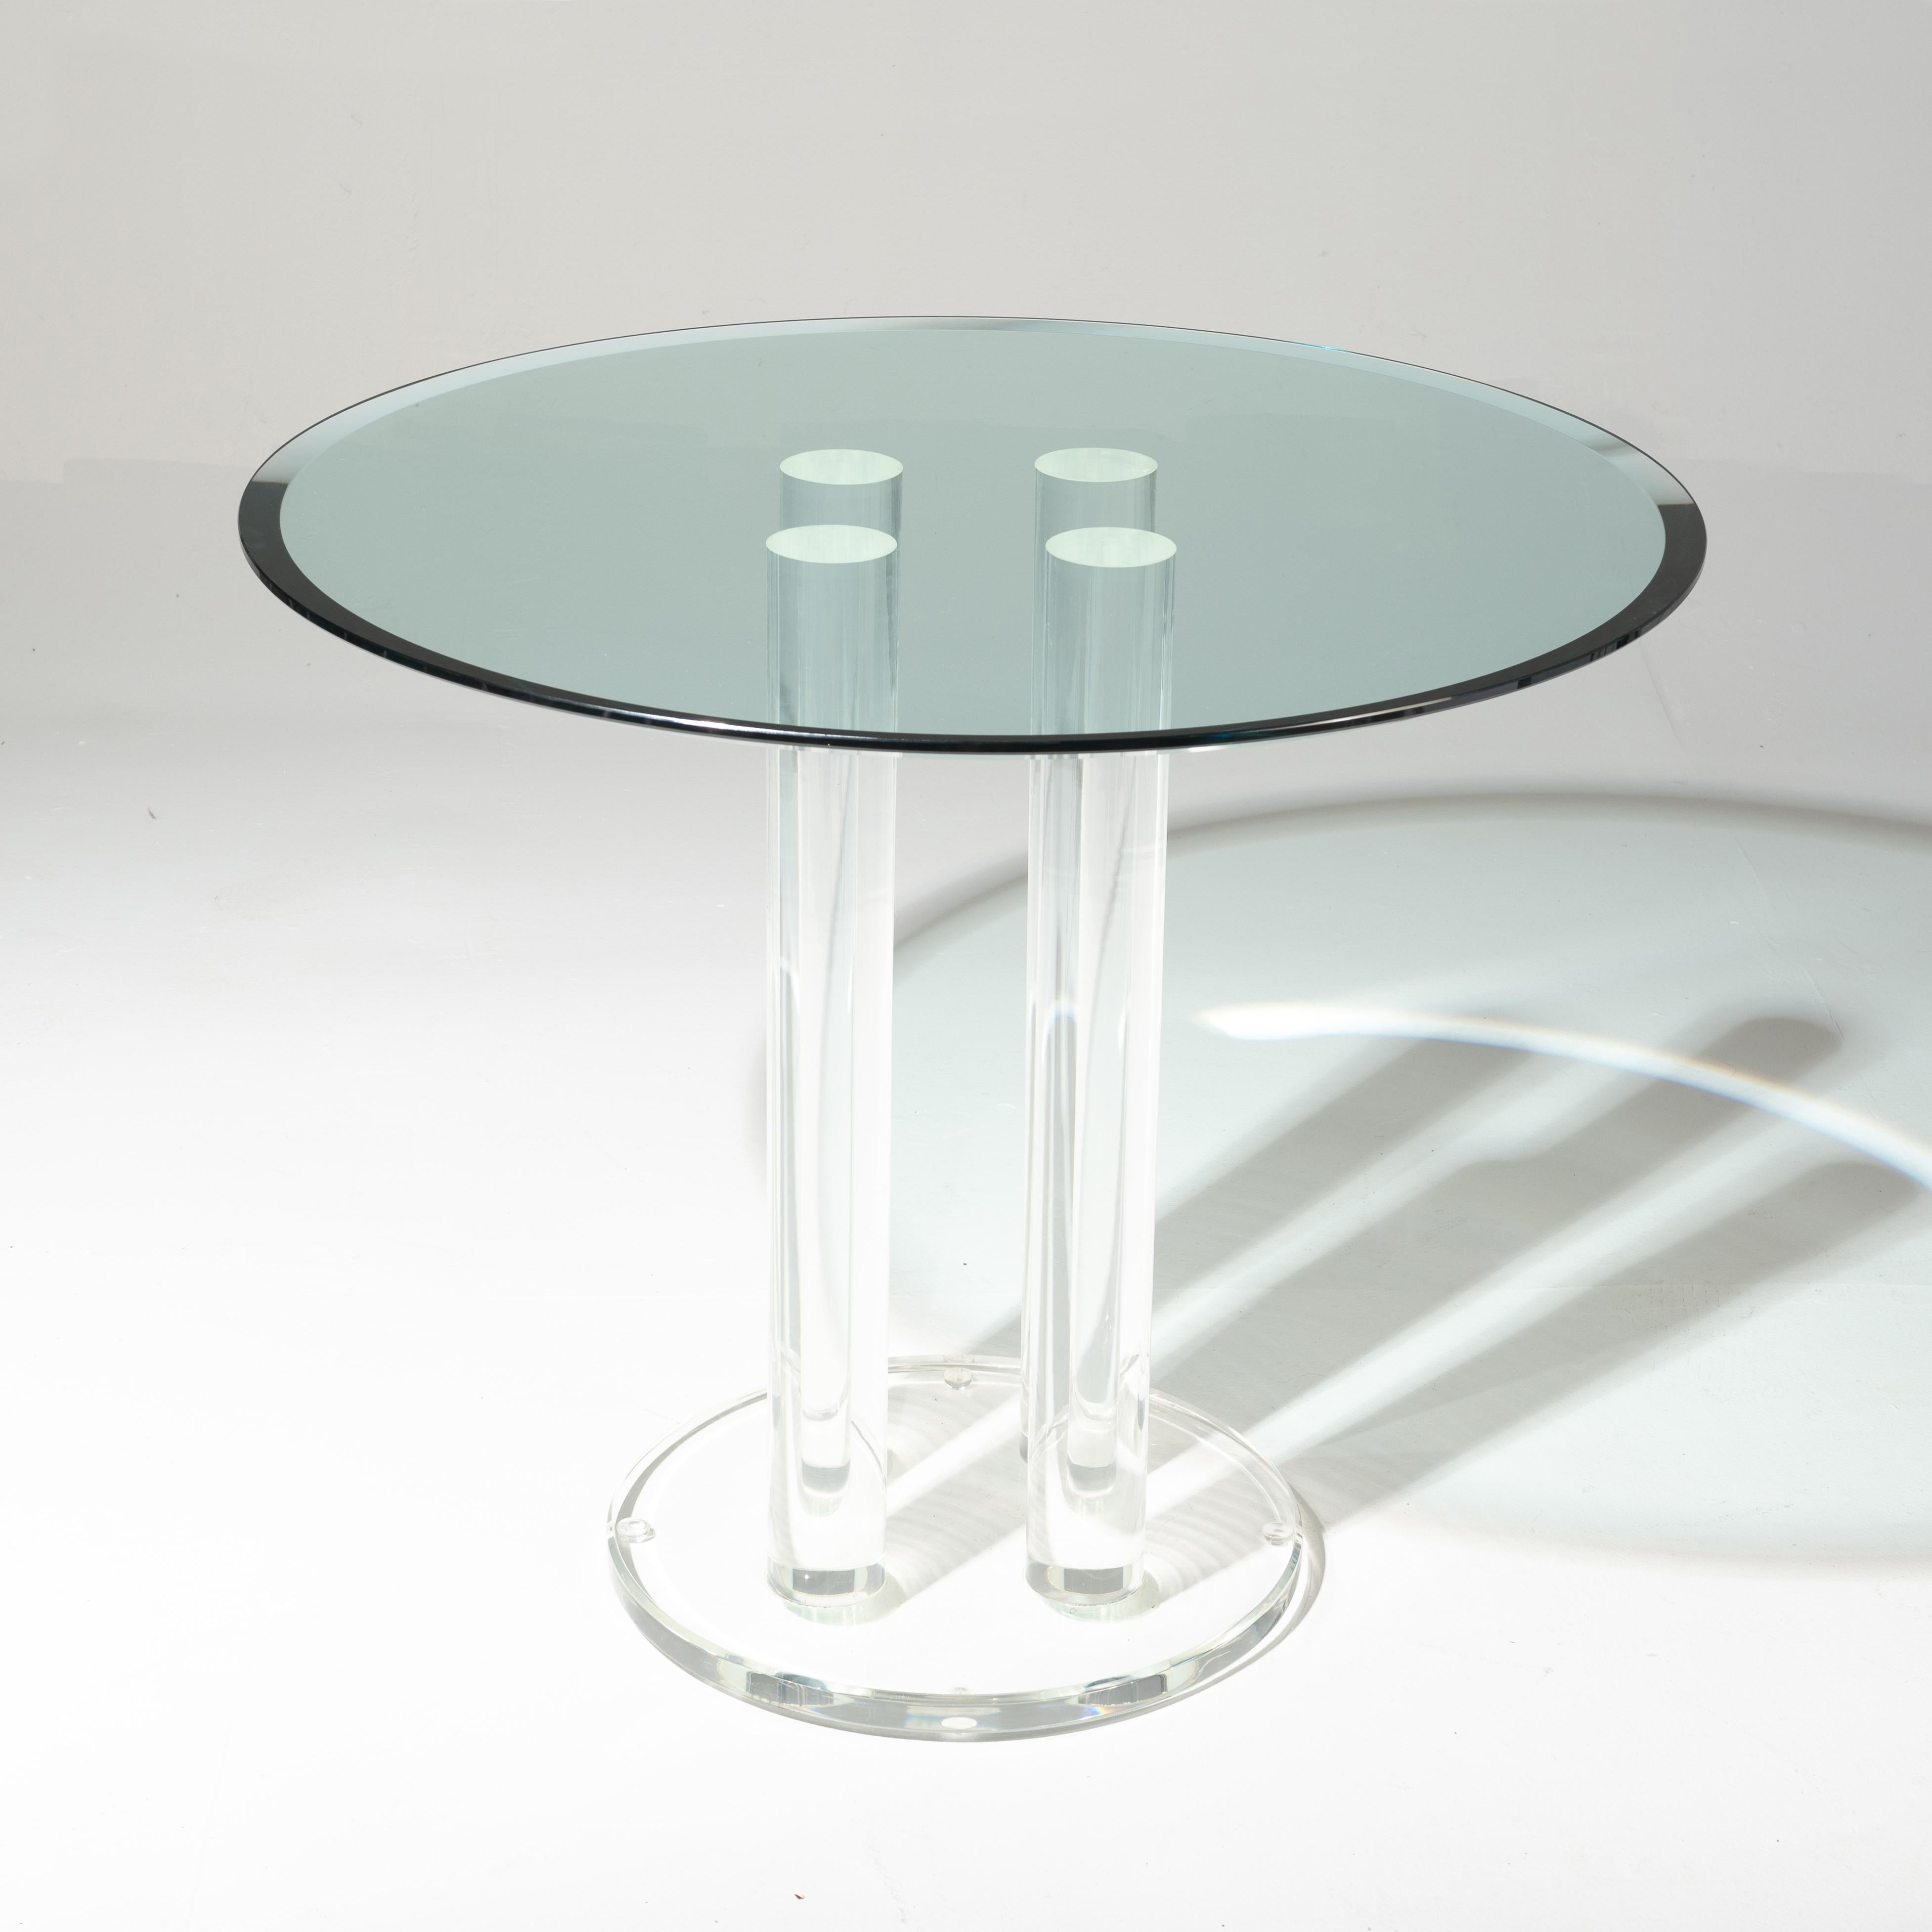 A Lucite dining. Table or center table from the 1970s. The base diameter is 18